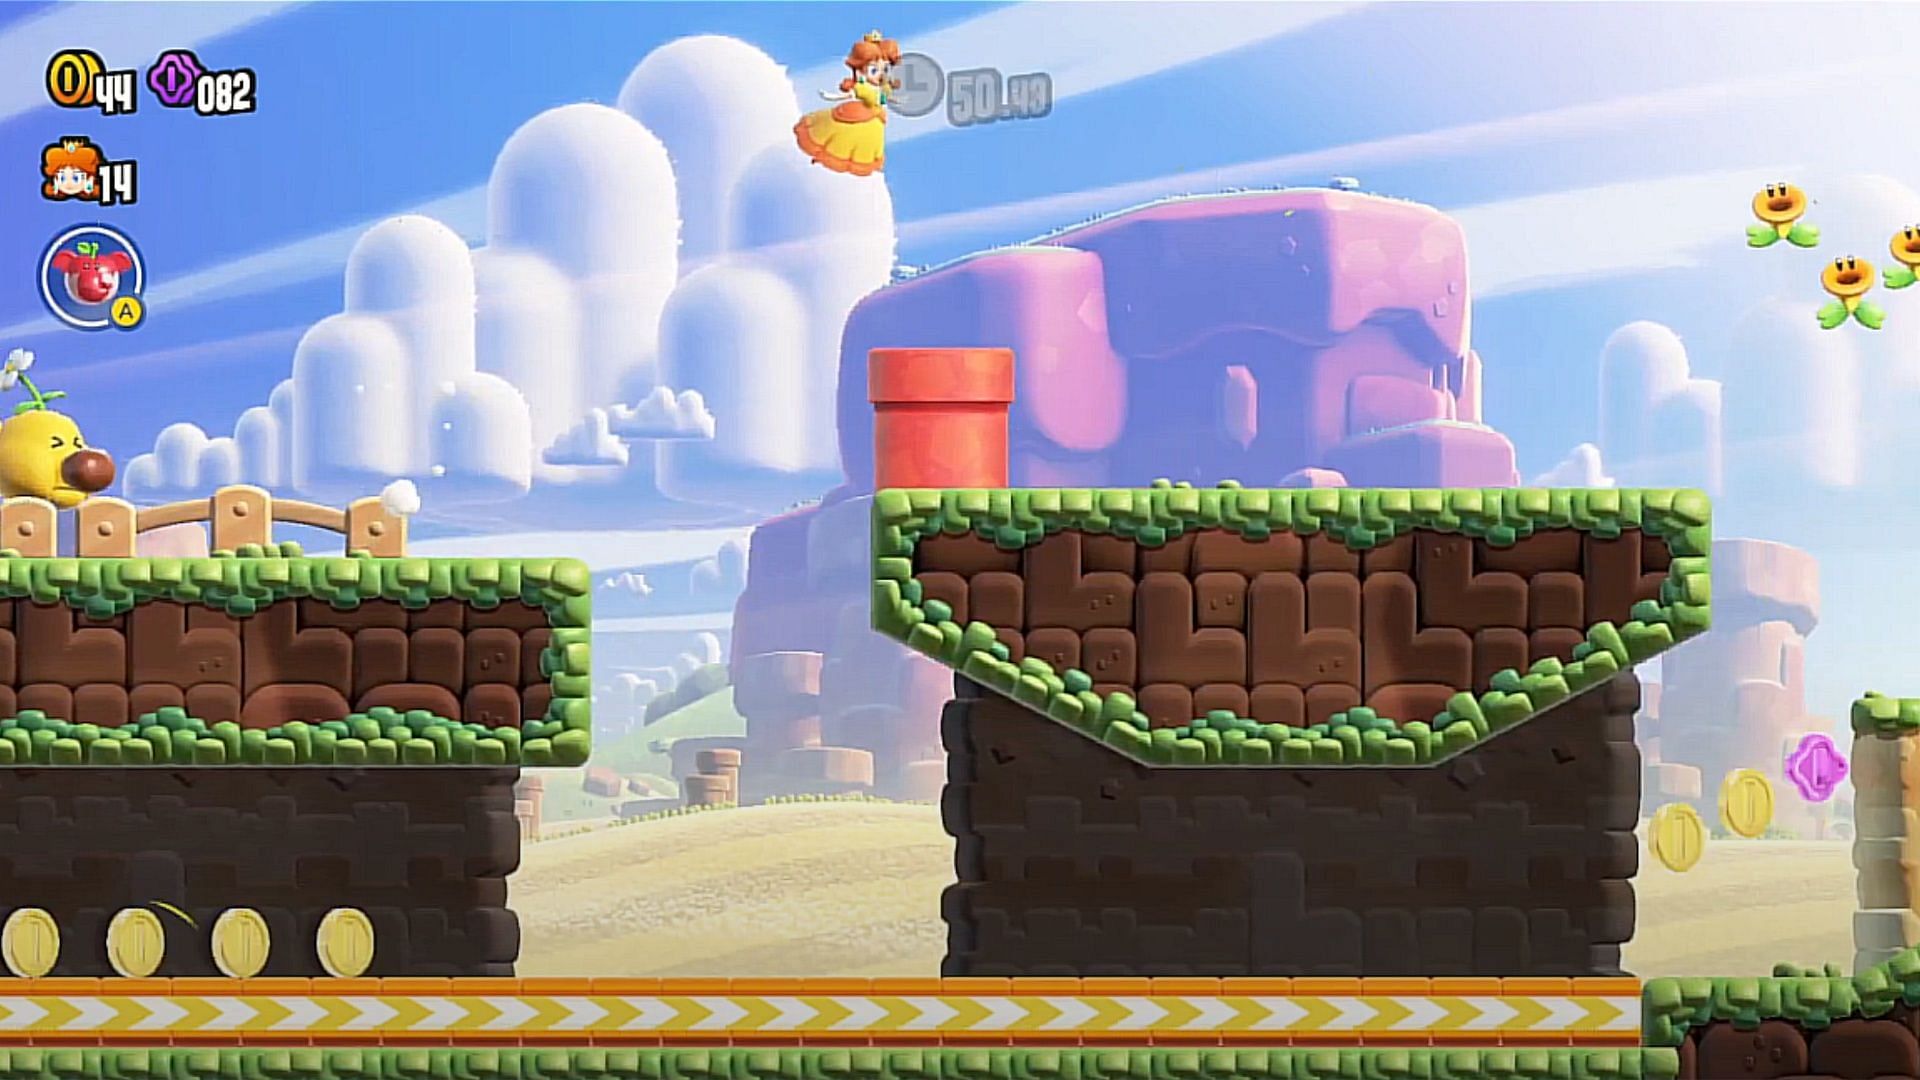 Super Mario Bros Wonder review – an all-levels multiplayer with madcap  moments of delight, Games